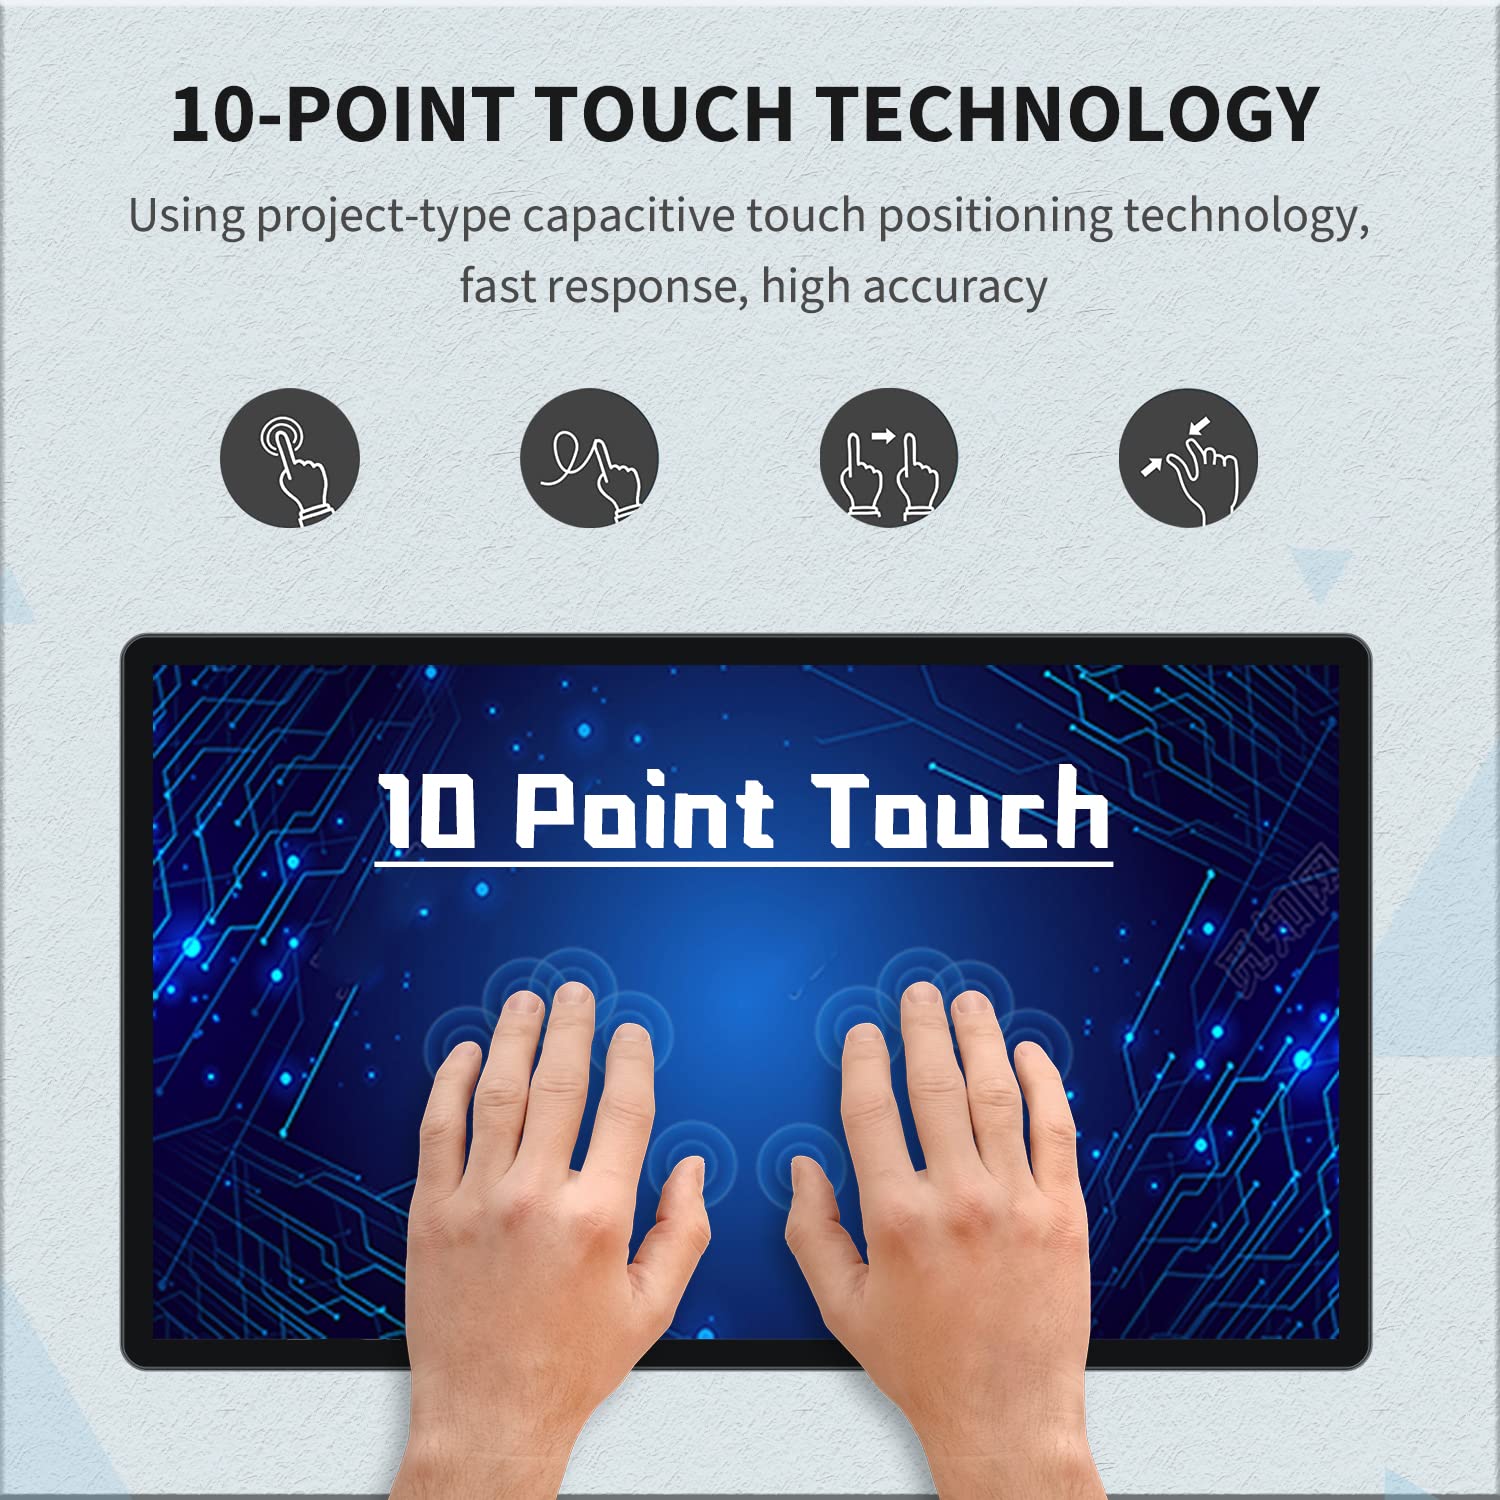 TouchWo 21.5 inch Android 9.0 Touchscreen Industrial PC, 16:9 FHD 1080P, WiFi and Built-in Speakers, RK3288 2GB RAM & 16GB ROM, Smart Board for Classroom, Meeting & Game